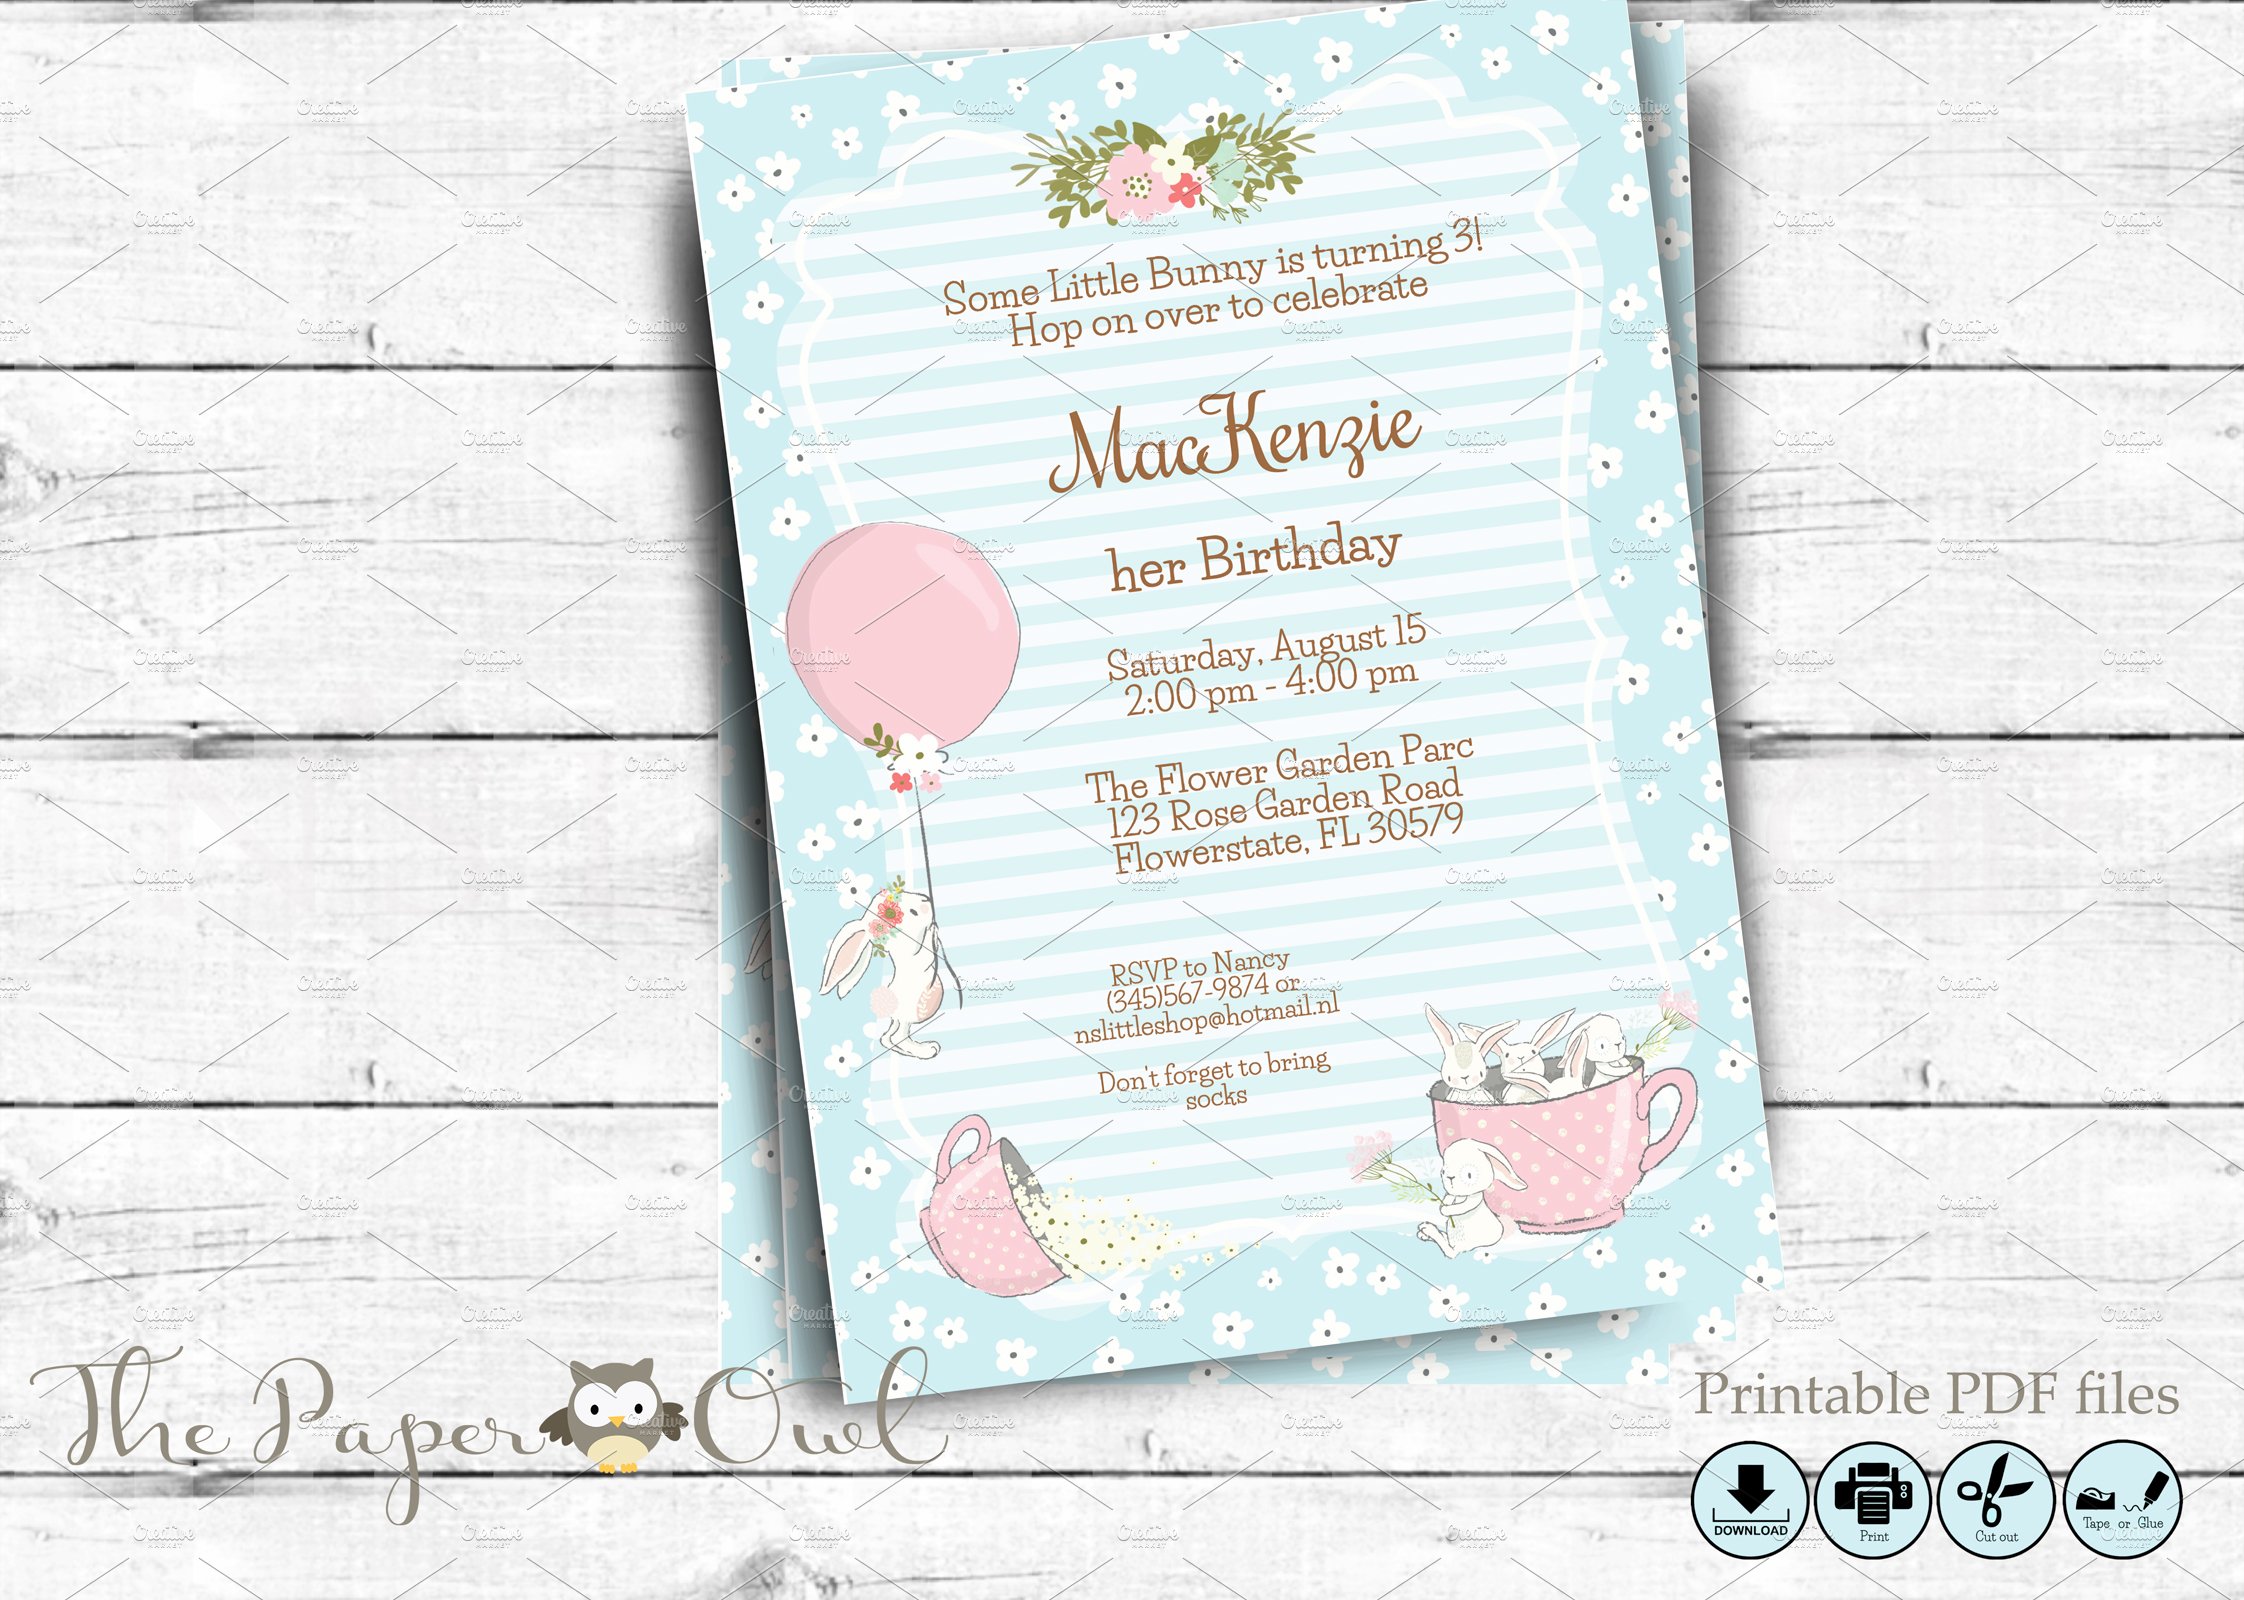 Bunny birthday party invitation preview image.